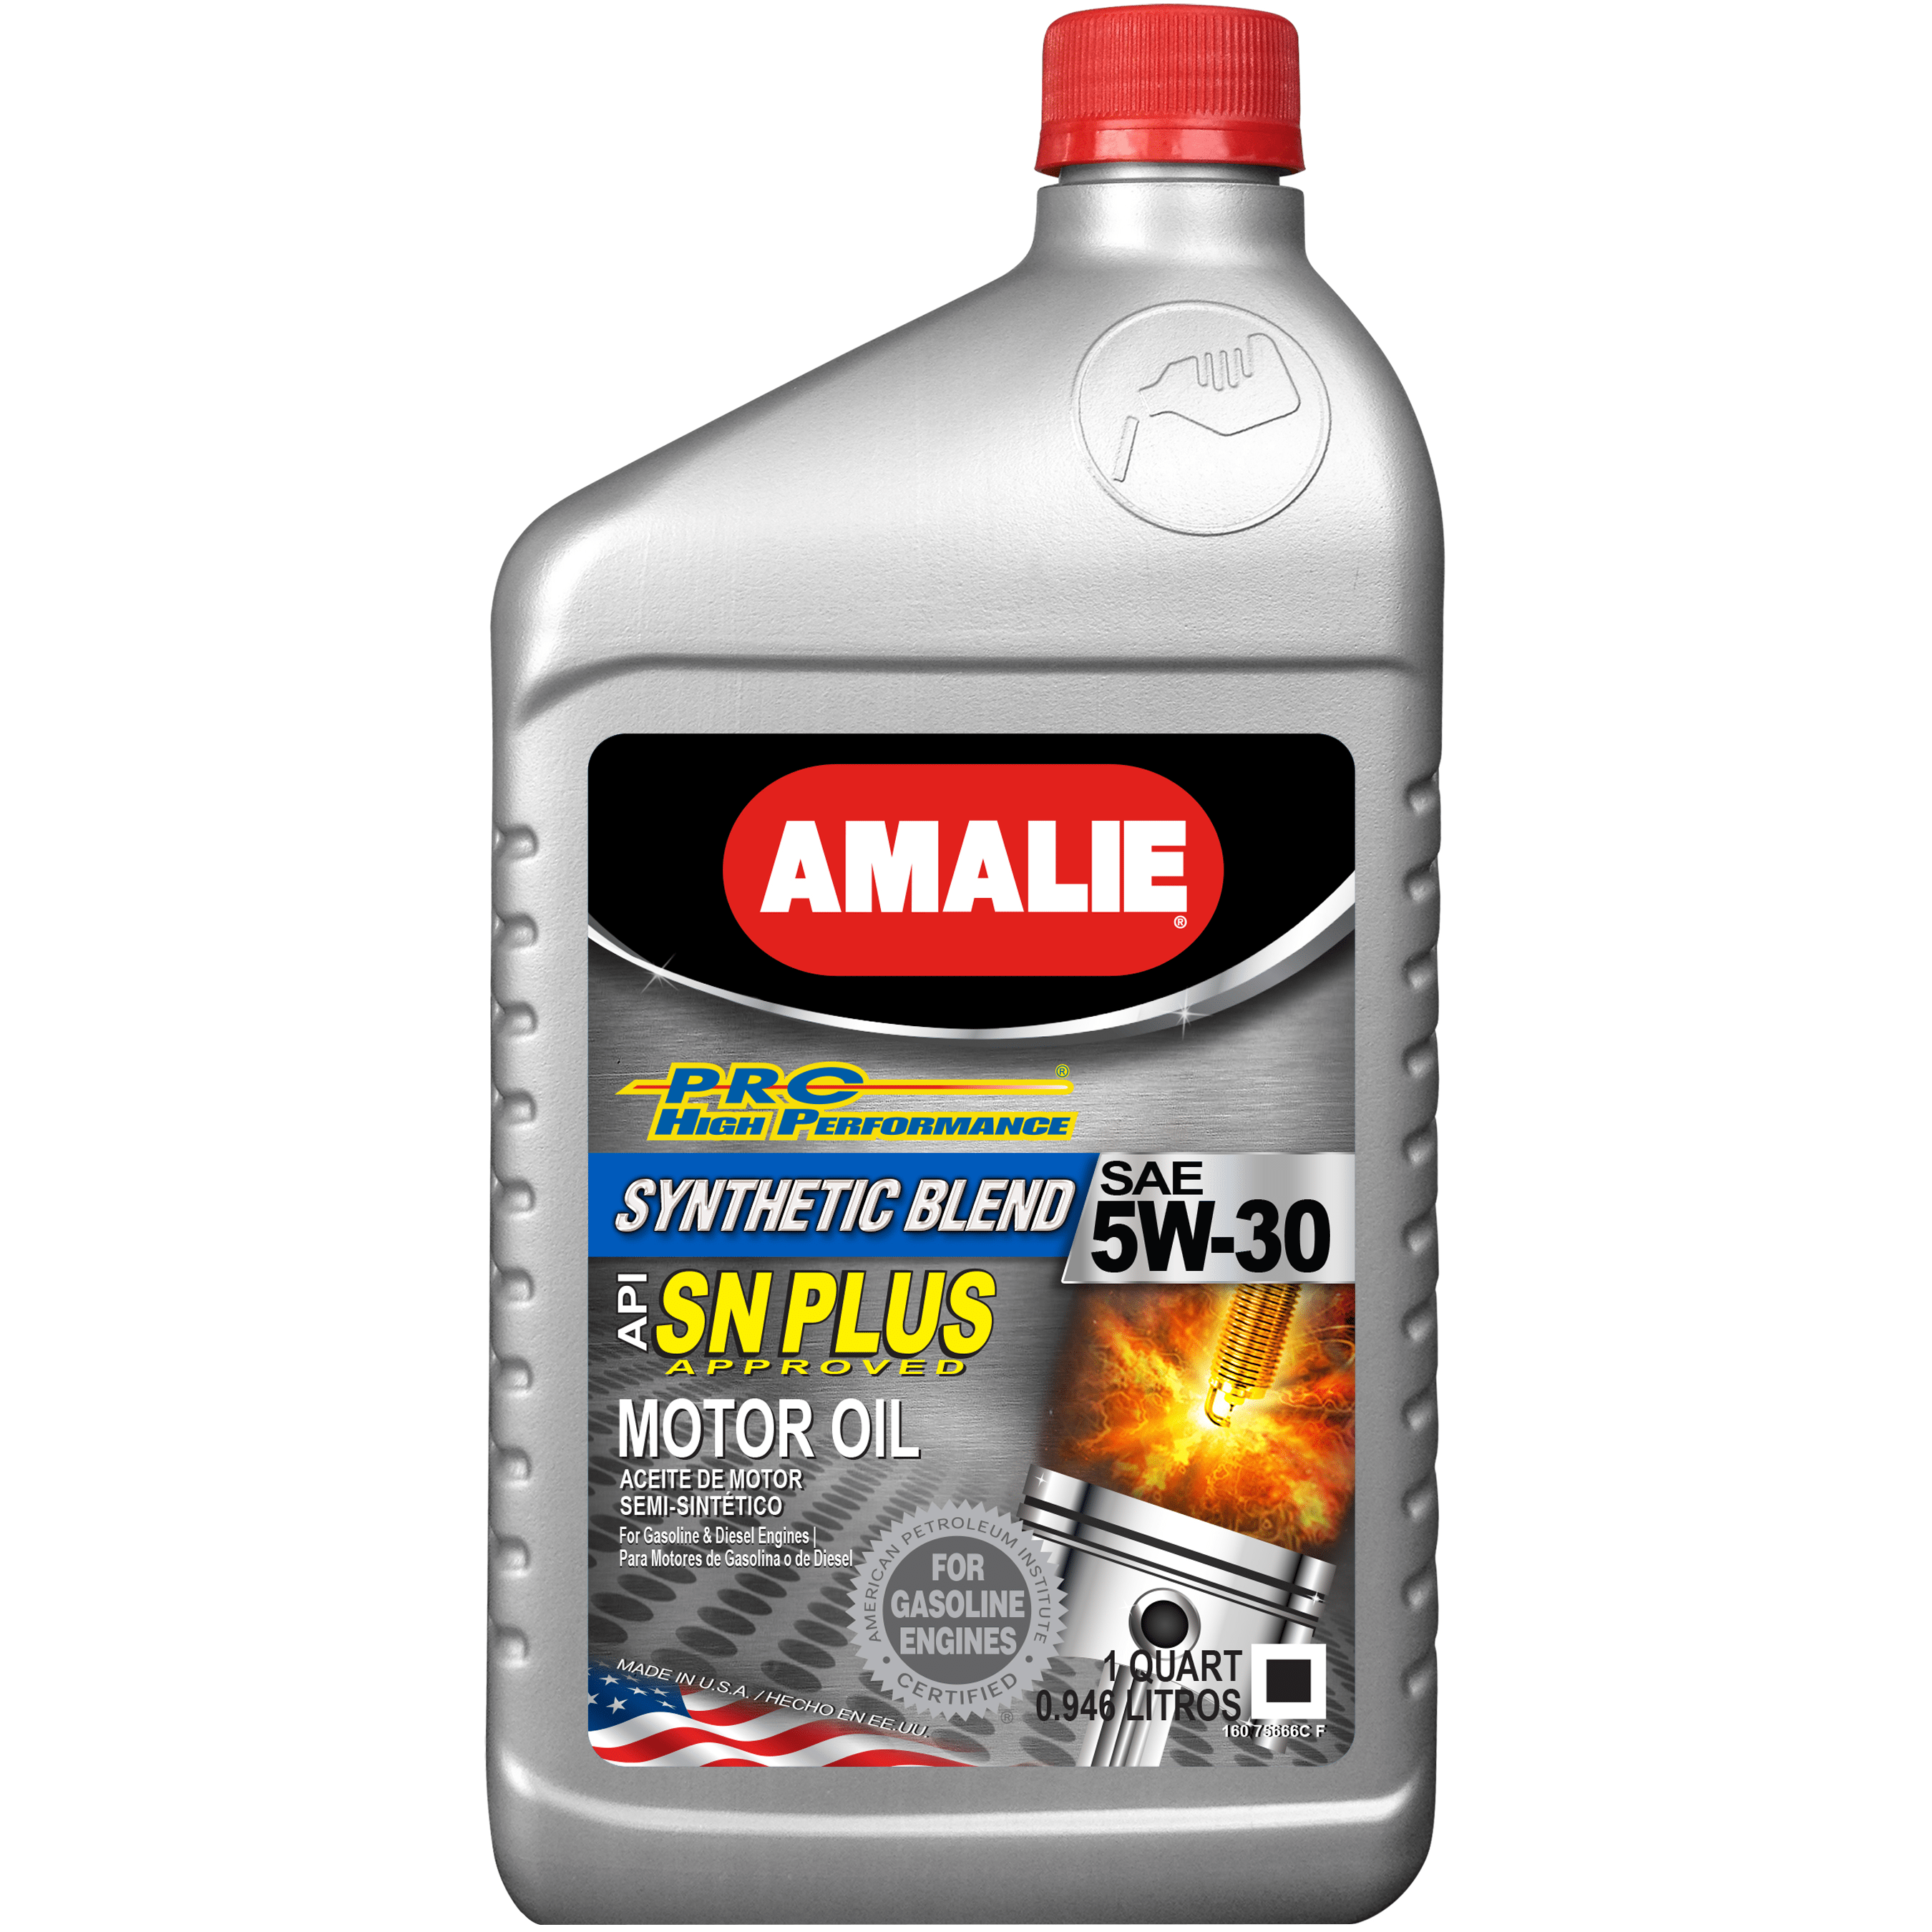 Amalie Oil Pro High Performance Synthetic Blend 5W-30 Case